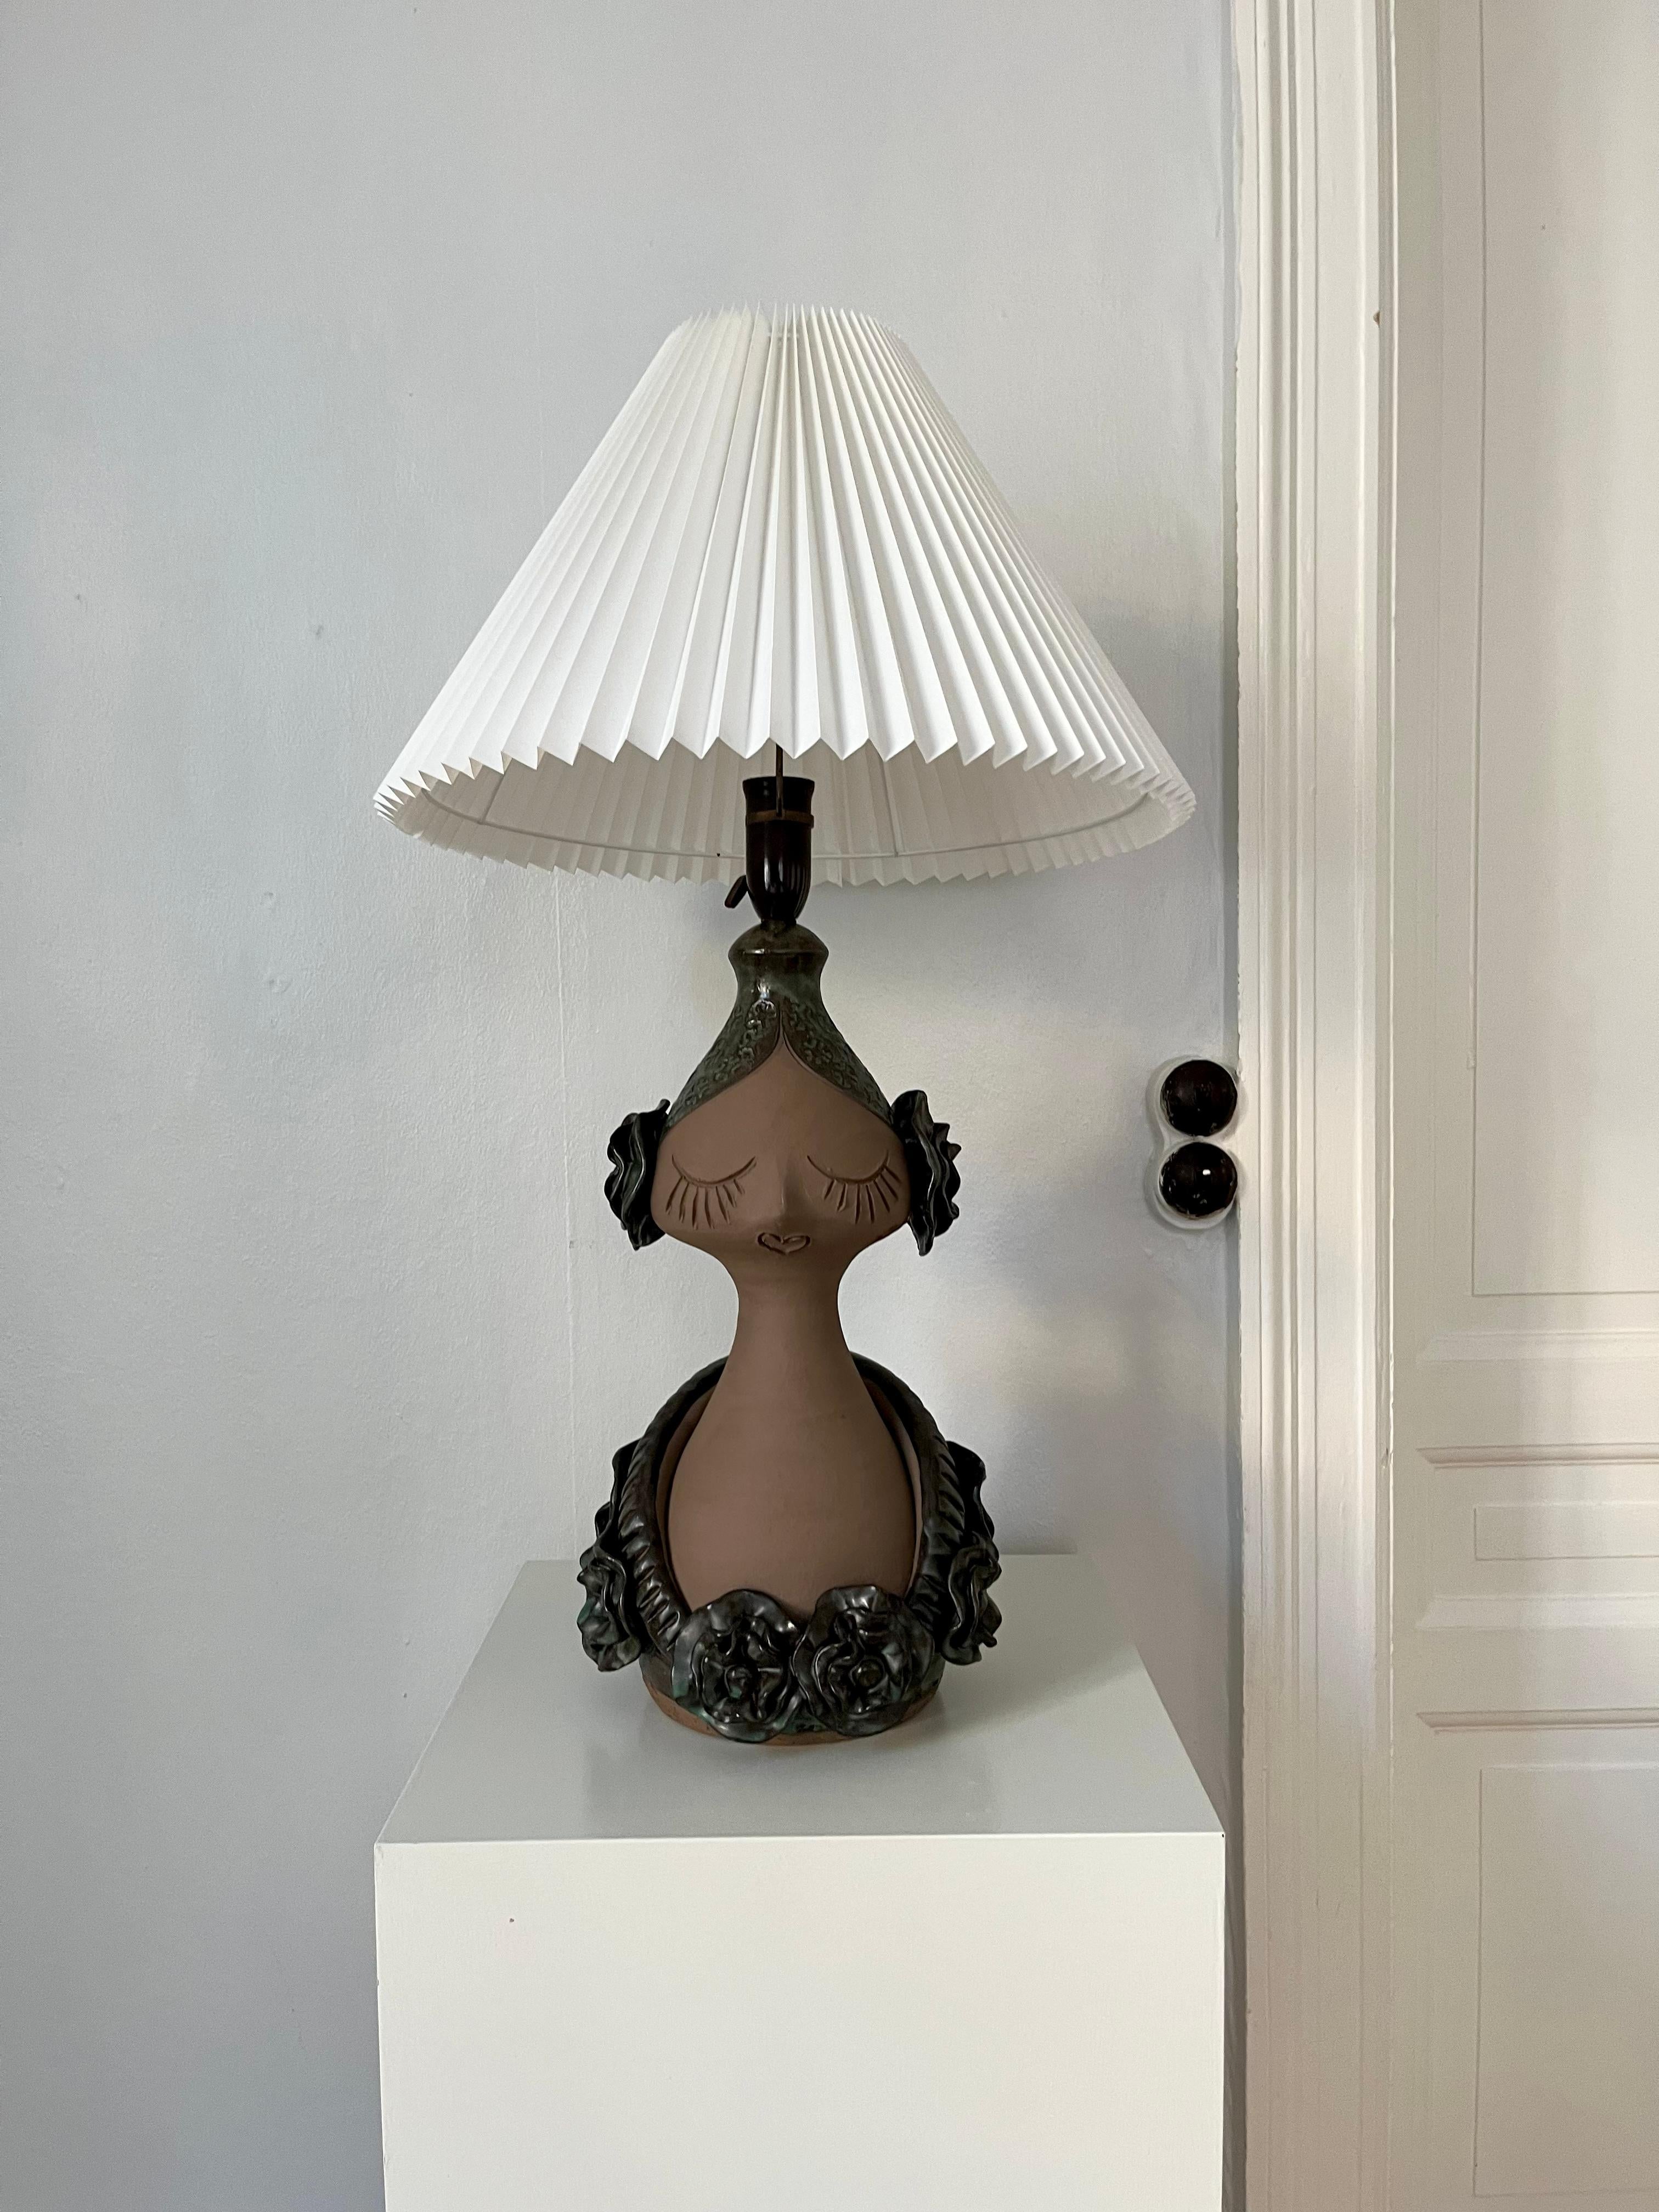 This 1970s hand-sculpted Danish sculptural ceramic table lamp by Flemming Ross is a true statement piece. Monumental and eye-catching, this amazing piece of ceramic art is tall and in the shape of a woman's upper body, one of the ceramic artist